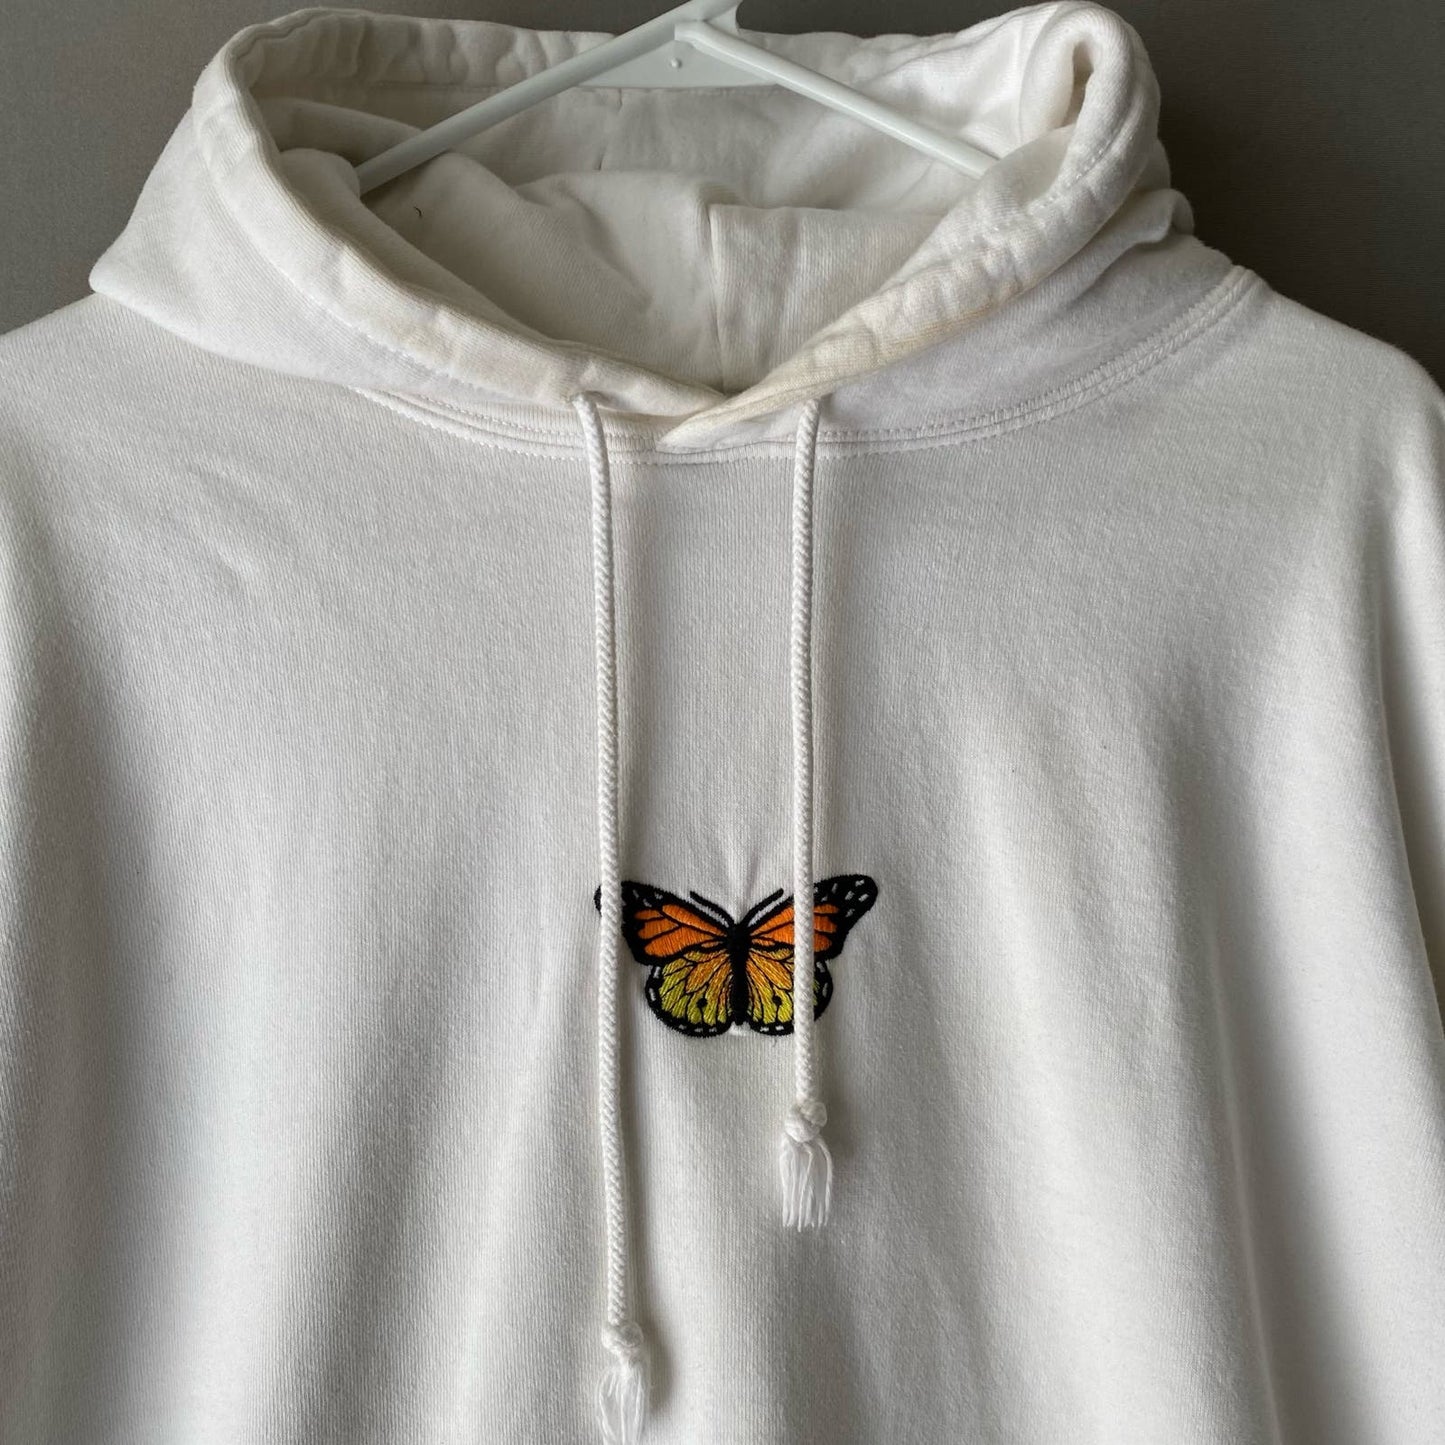 Brandy Melville sz One Size white butterfly embroider hoodie